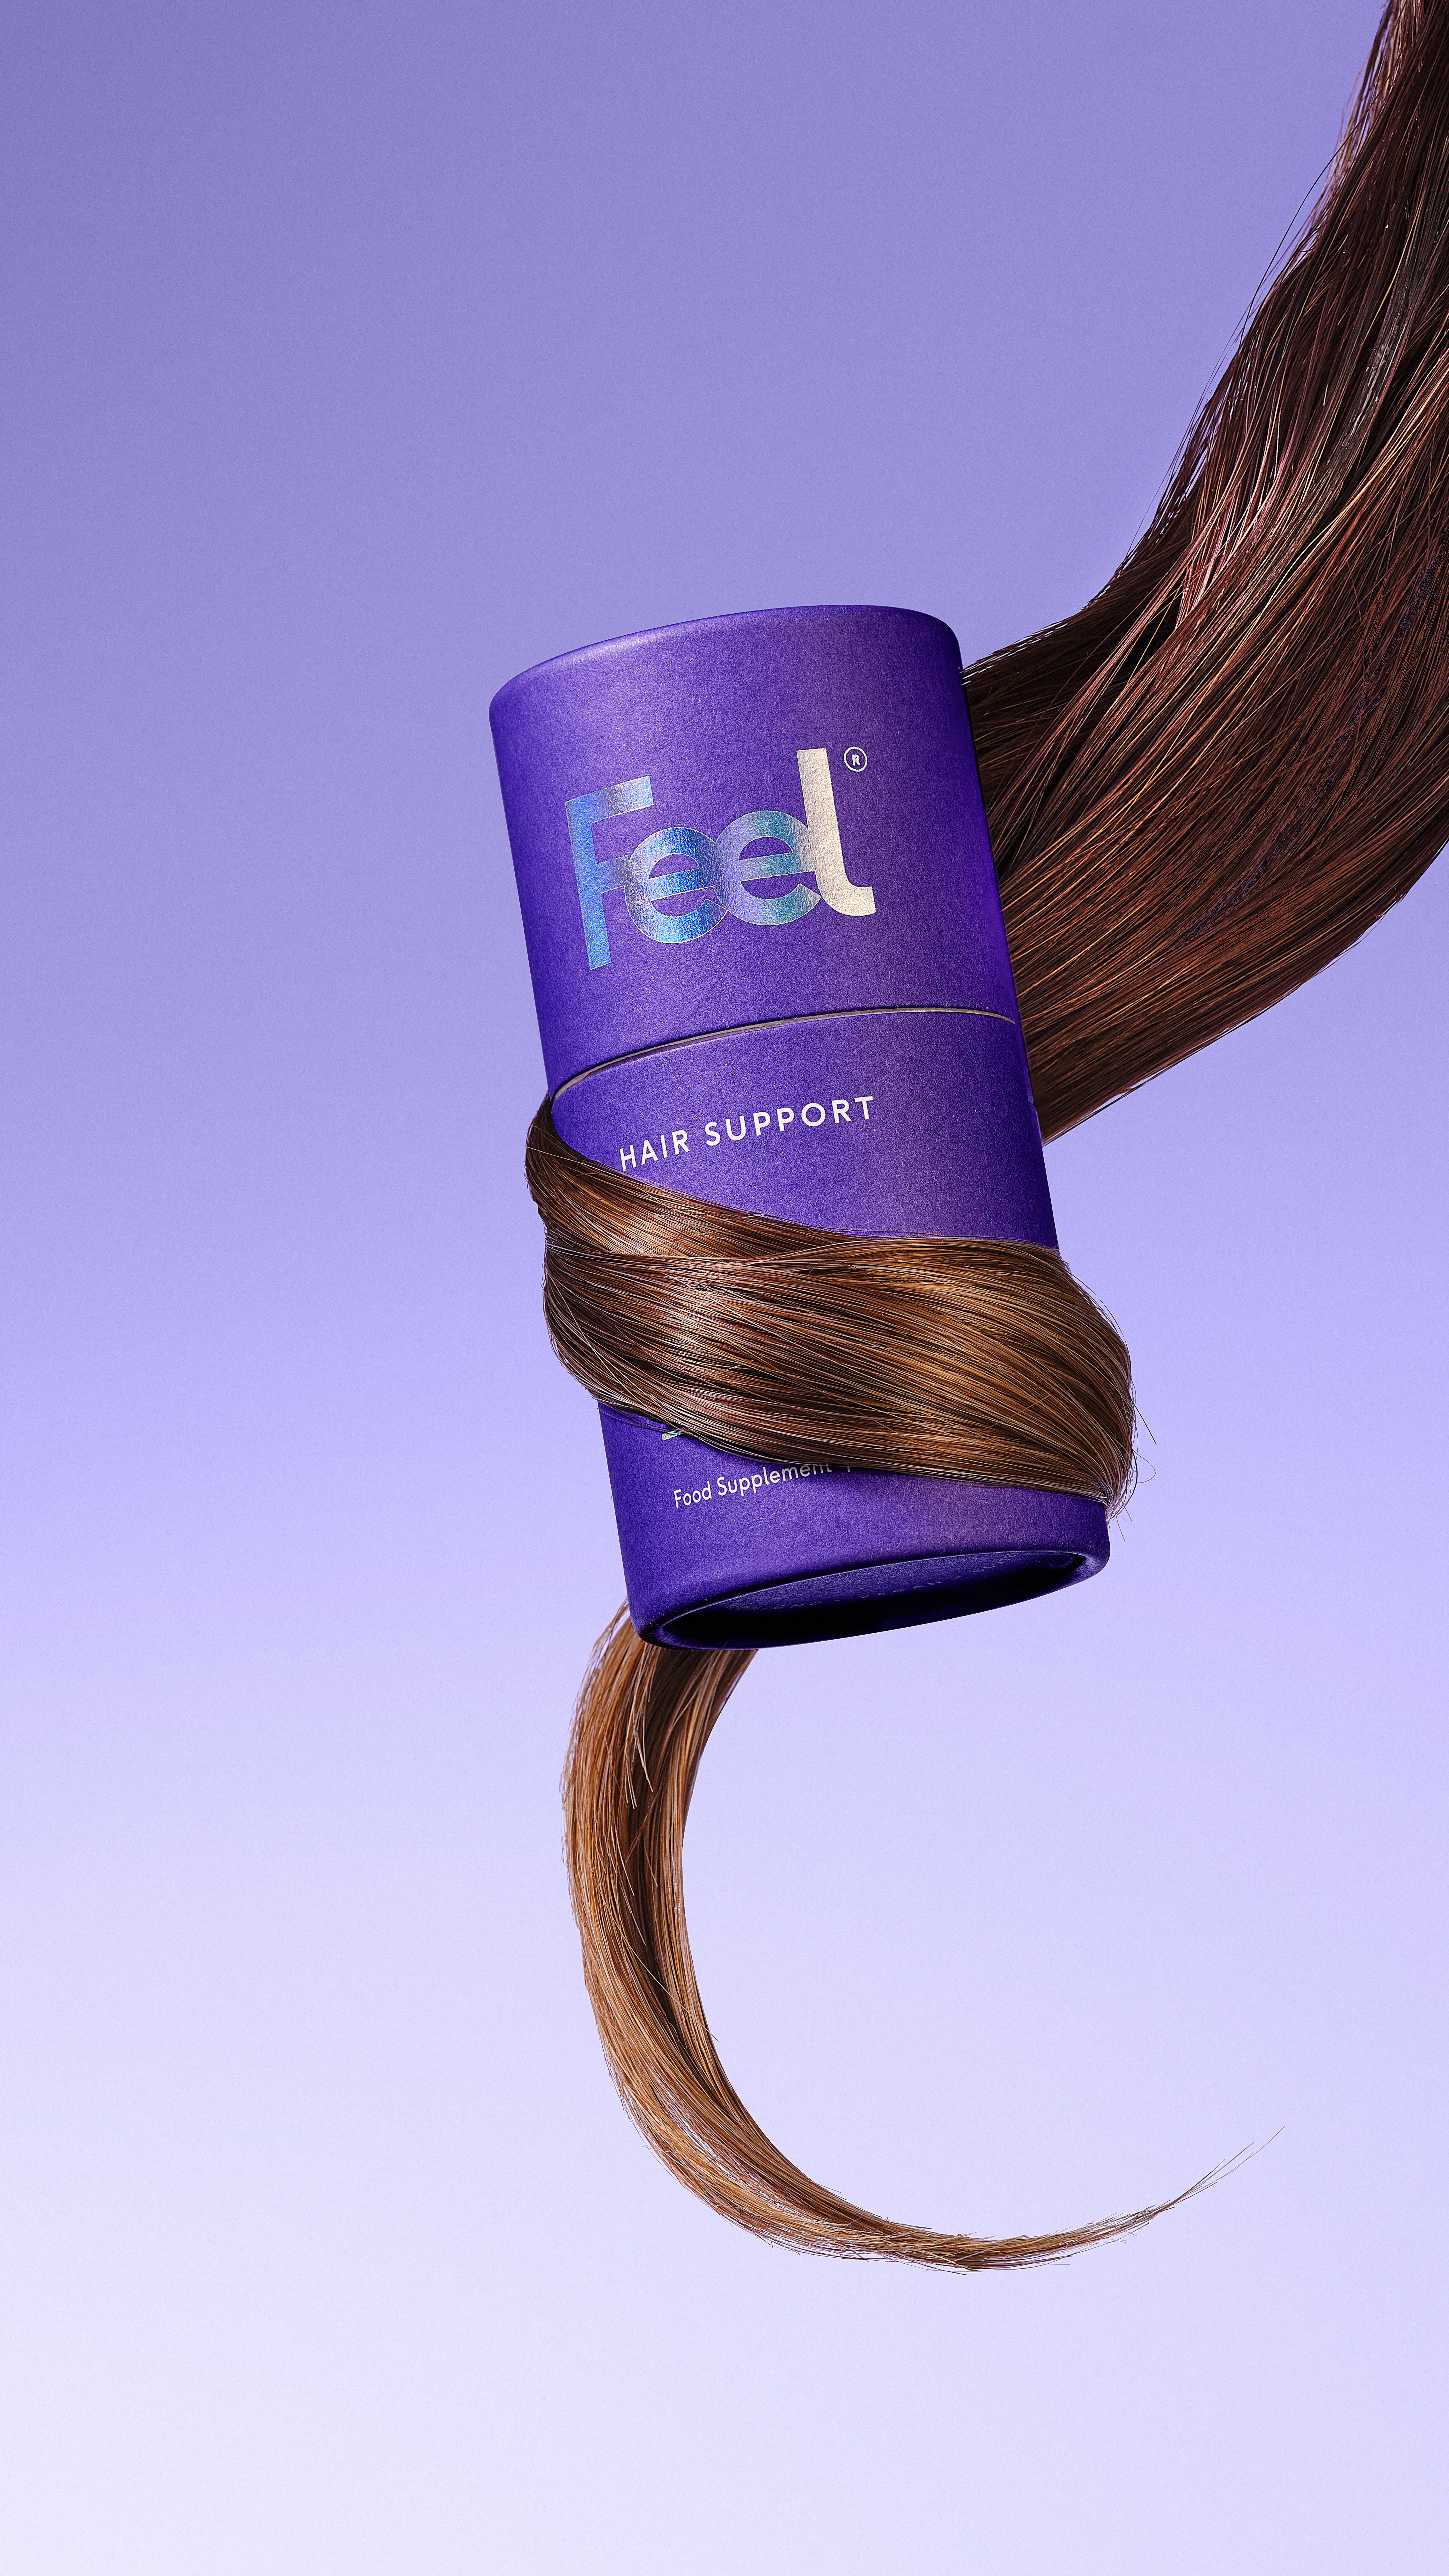 My Thoughts On the Feel Hair Supplement